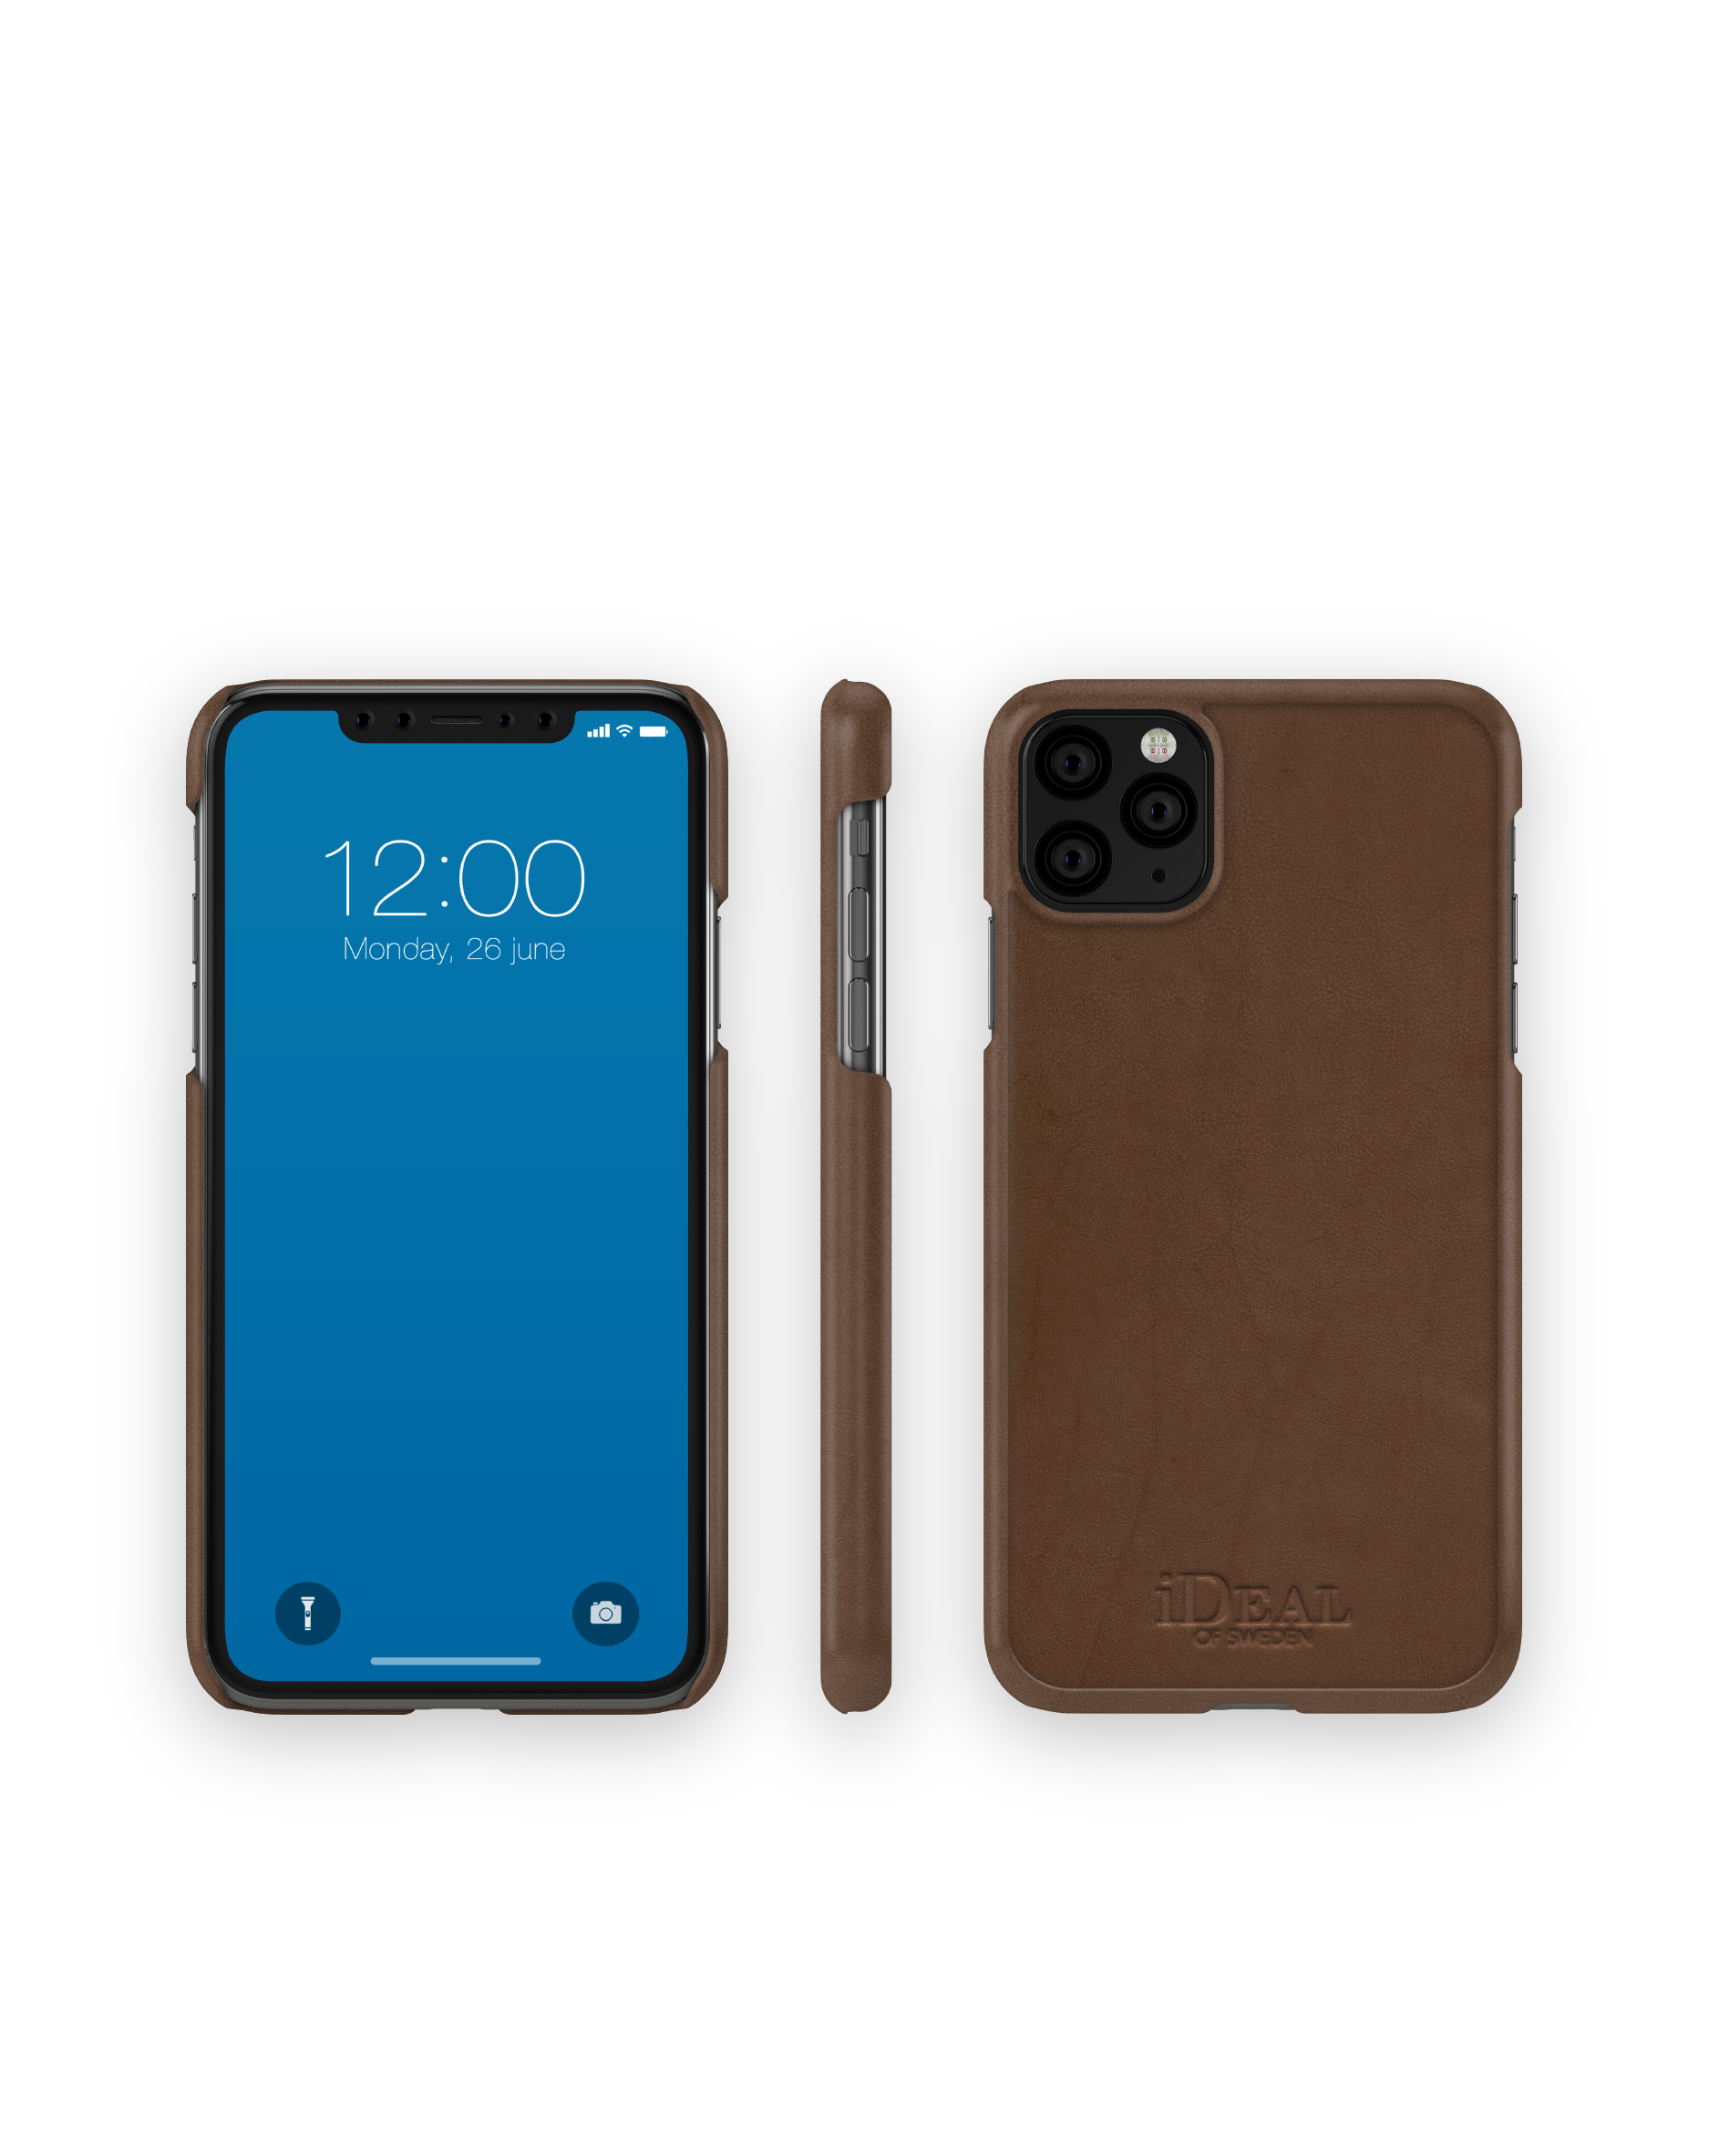 11 IDEAL iPhone XS Apple Brown iPhone Backcover, Max, Max, Apple Apple, SWEDEN OF IDFC-I1965-COM-03, Pro